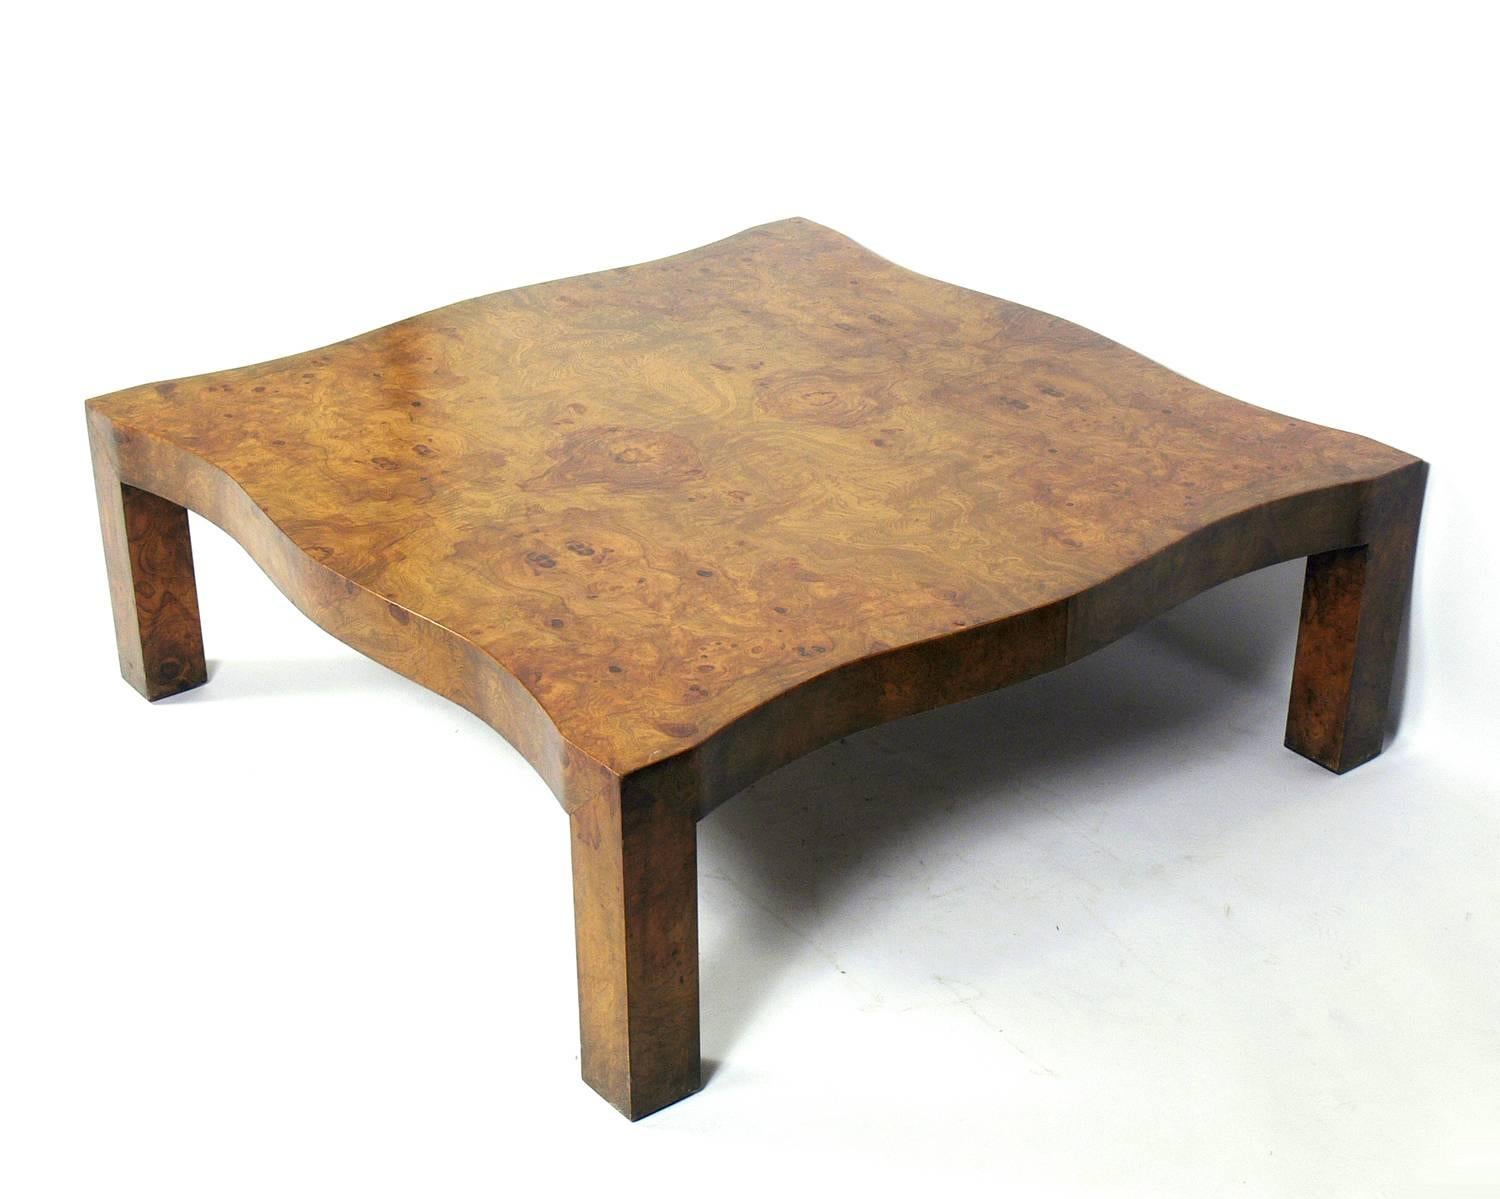 Large-scale burl wood coffee table in the manner of Samuel Marx, American, circa 1950s. Exhibits an elegant scalloped form with beautiful burl wood graining.